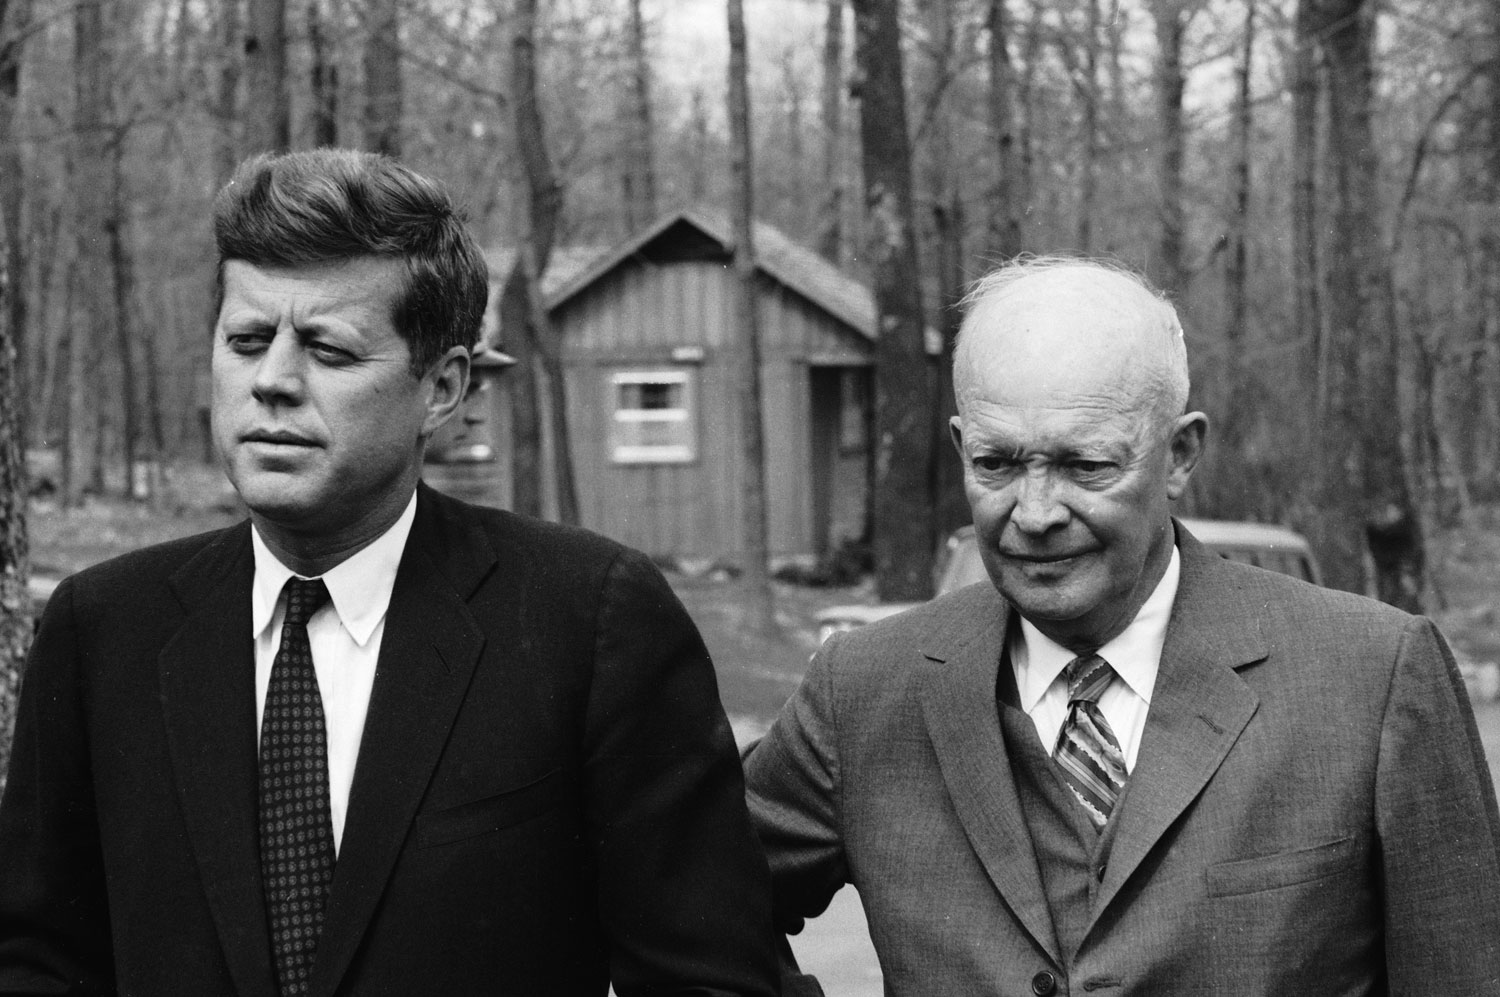 President John F. Kennedy meets with former President Dwight Eisenhower at Camp David in the midst of the Bay of Pigs crisis, 1961.